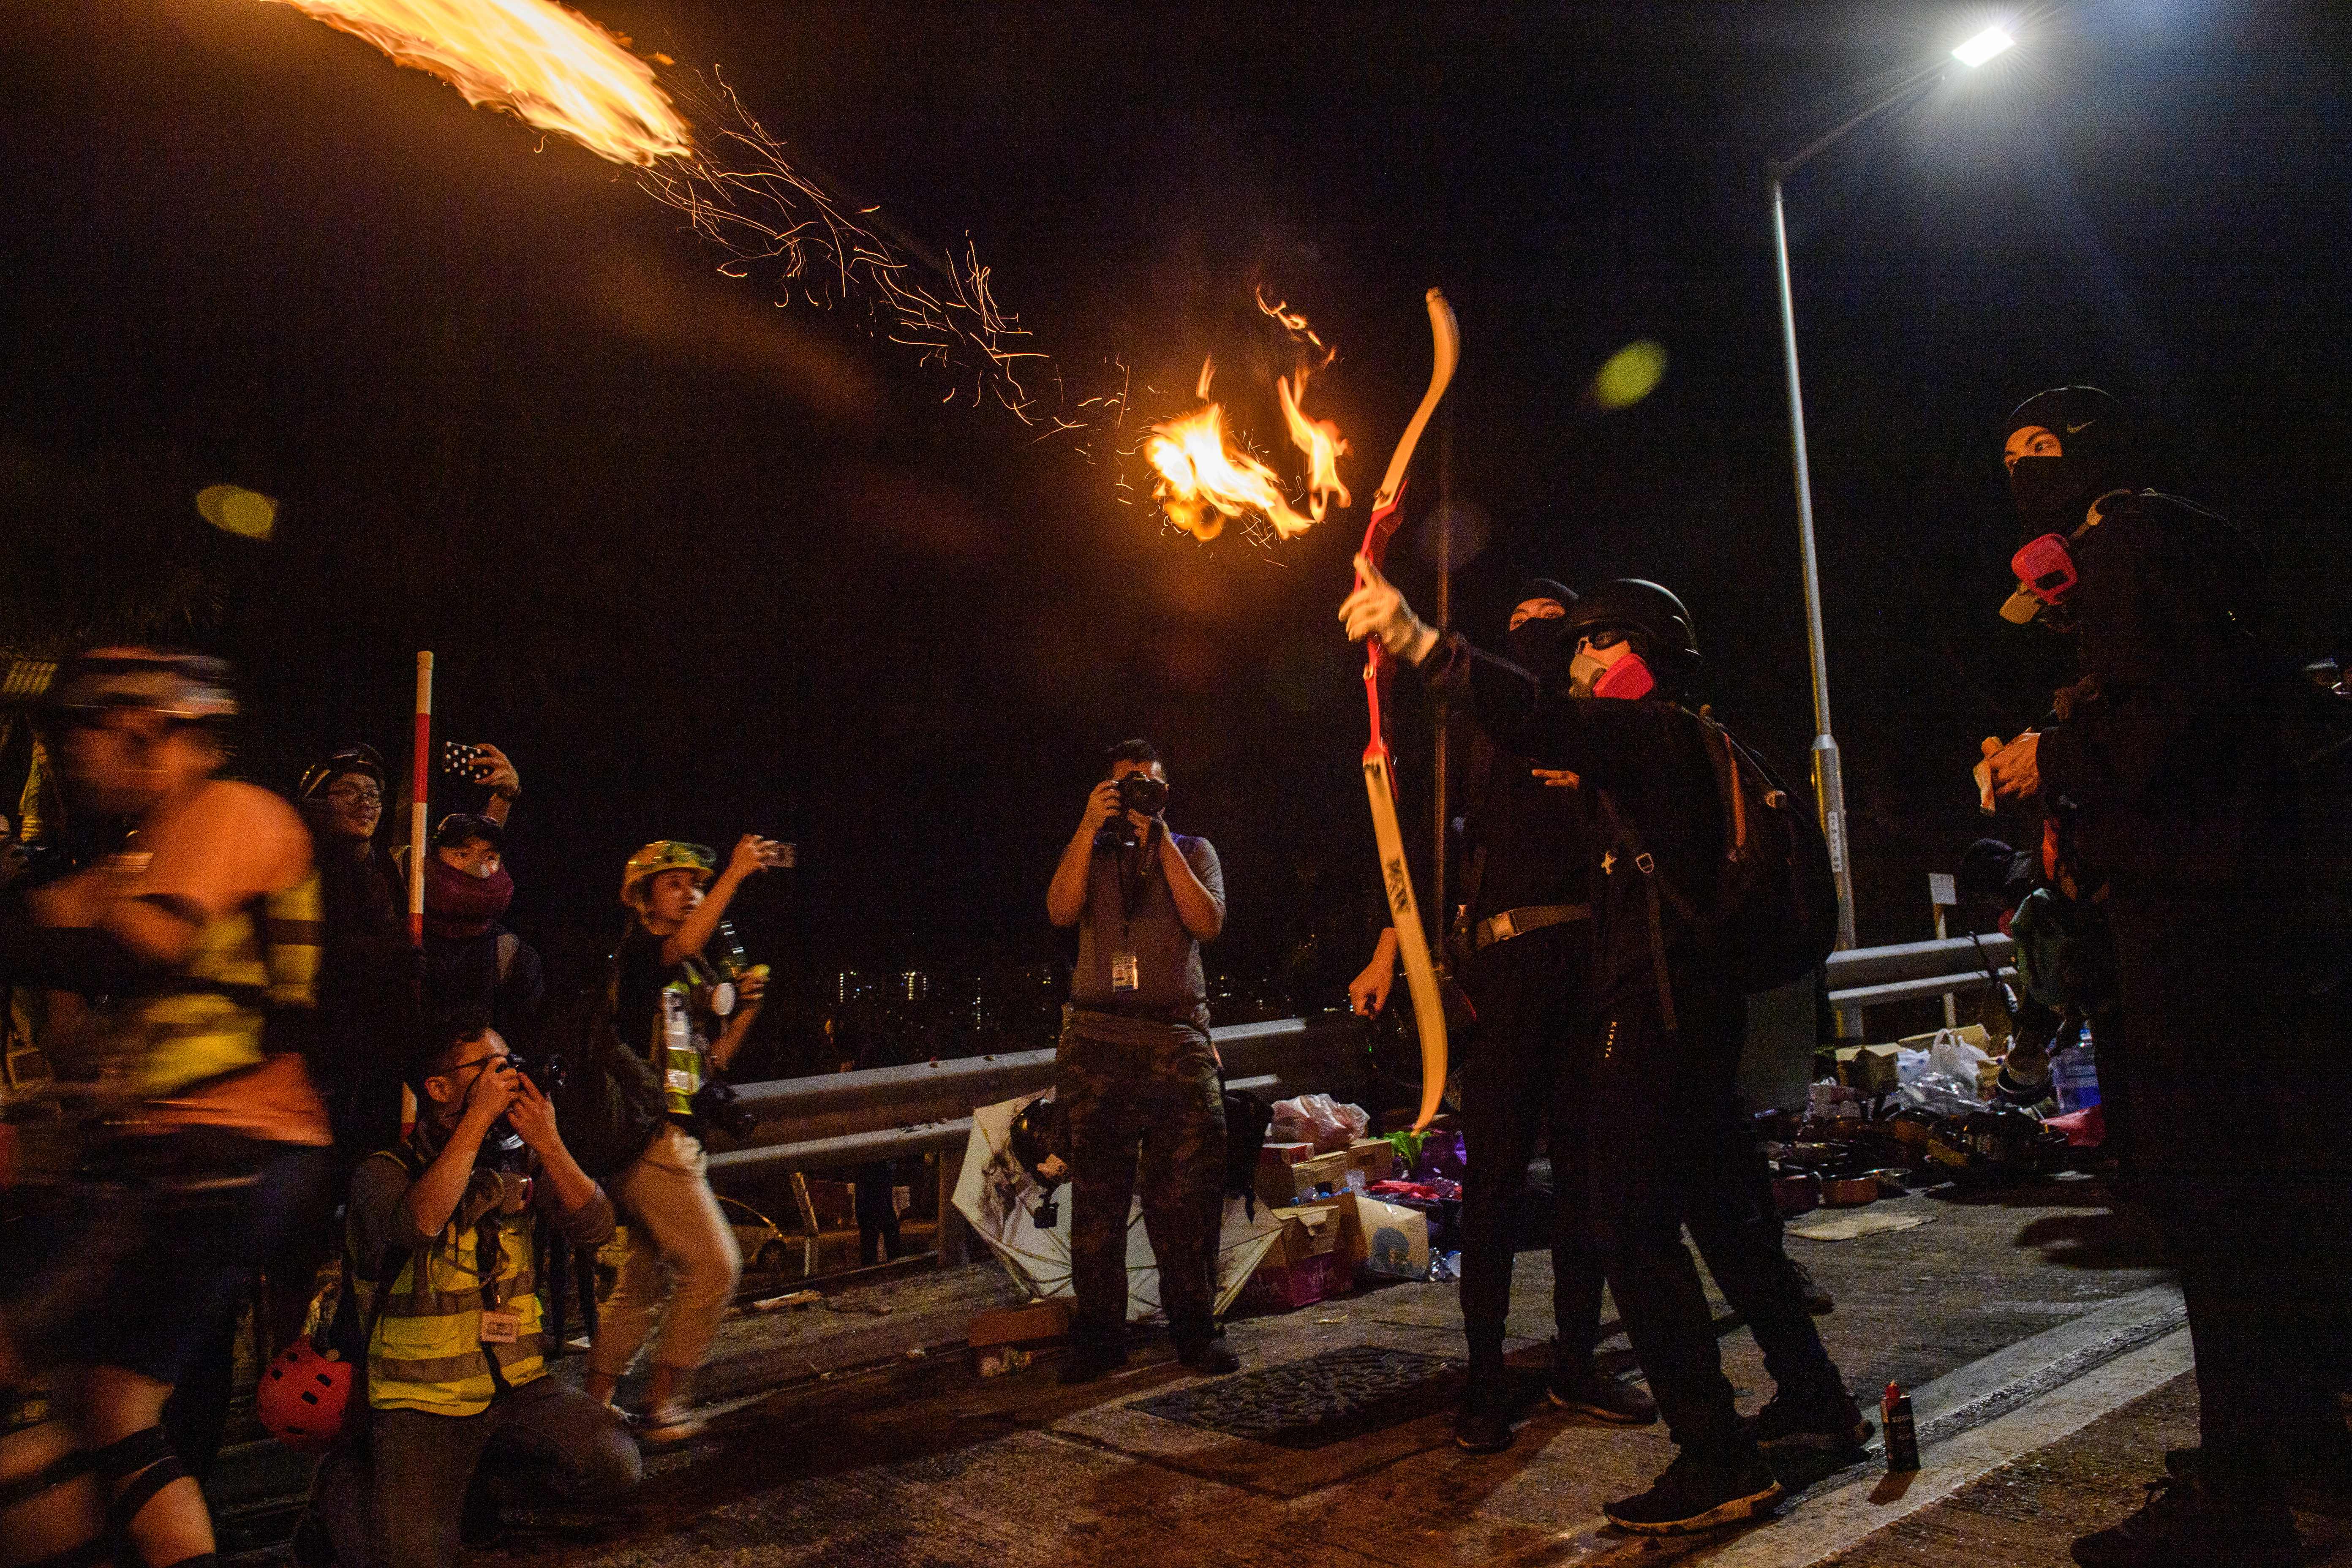 A protester releases a flaming arrow at the Chinese University of Hong Kong early on November 13, 2019.